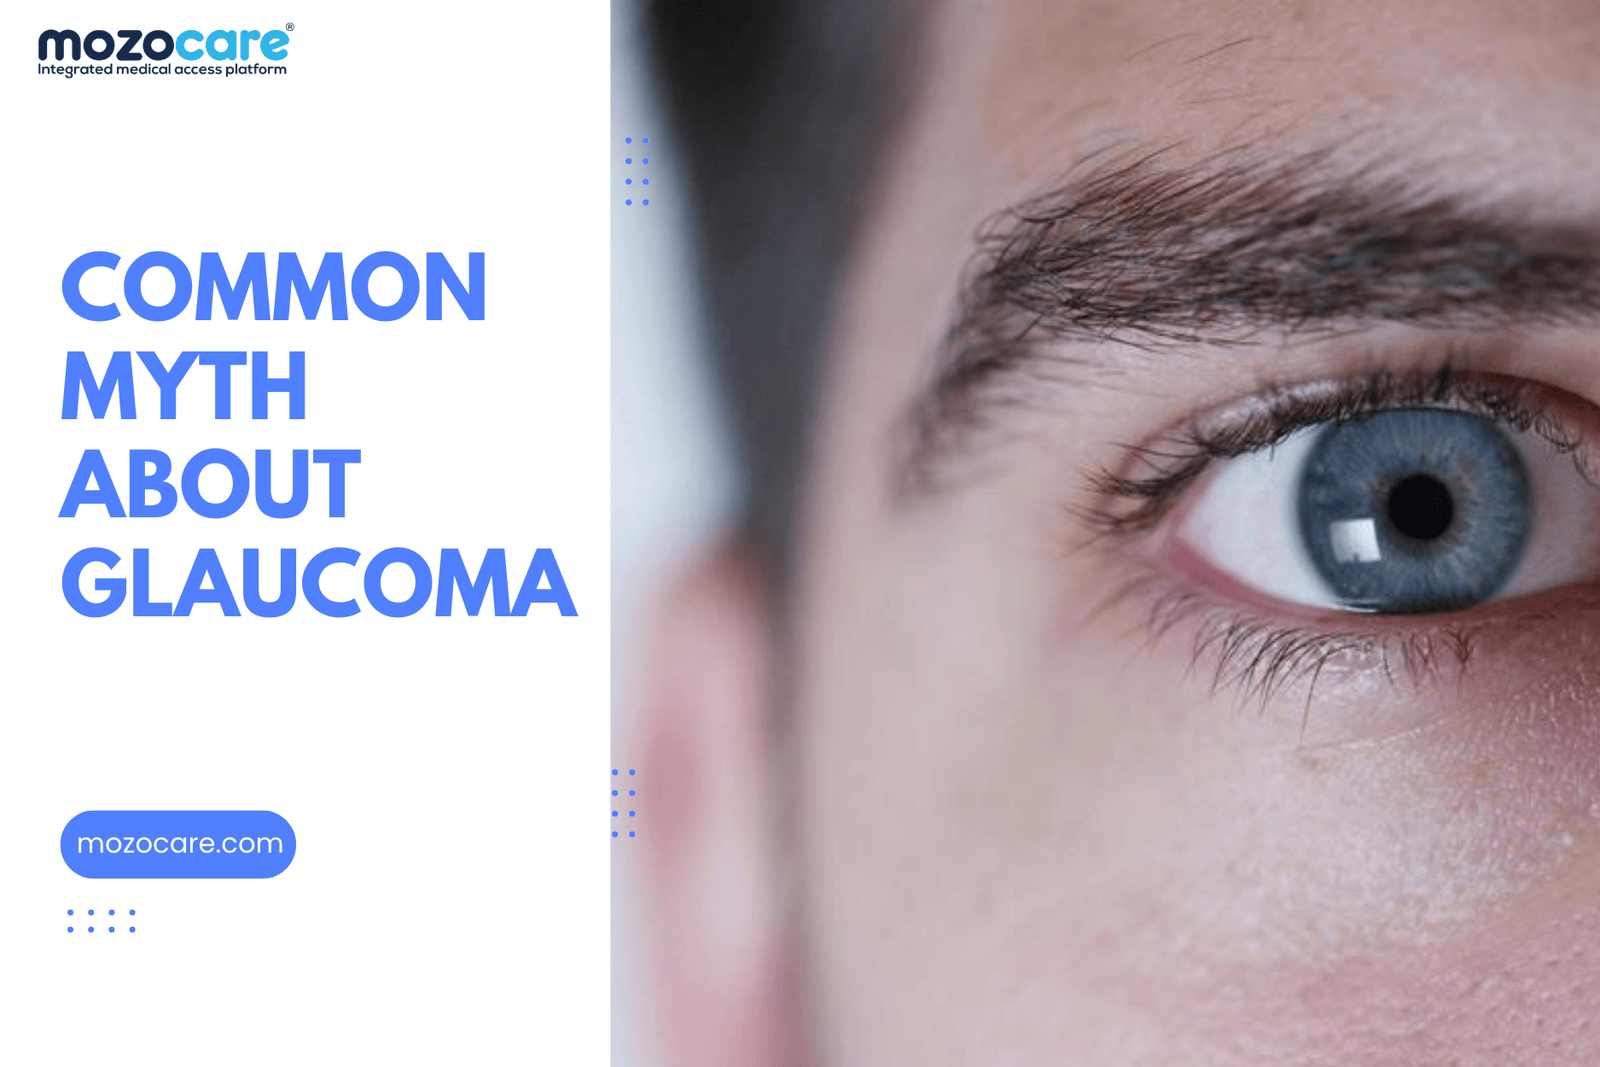 Common Myth About Glaucoma